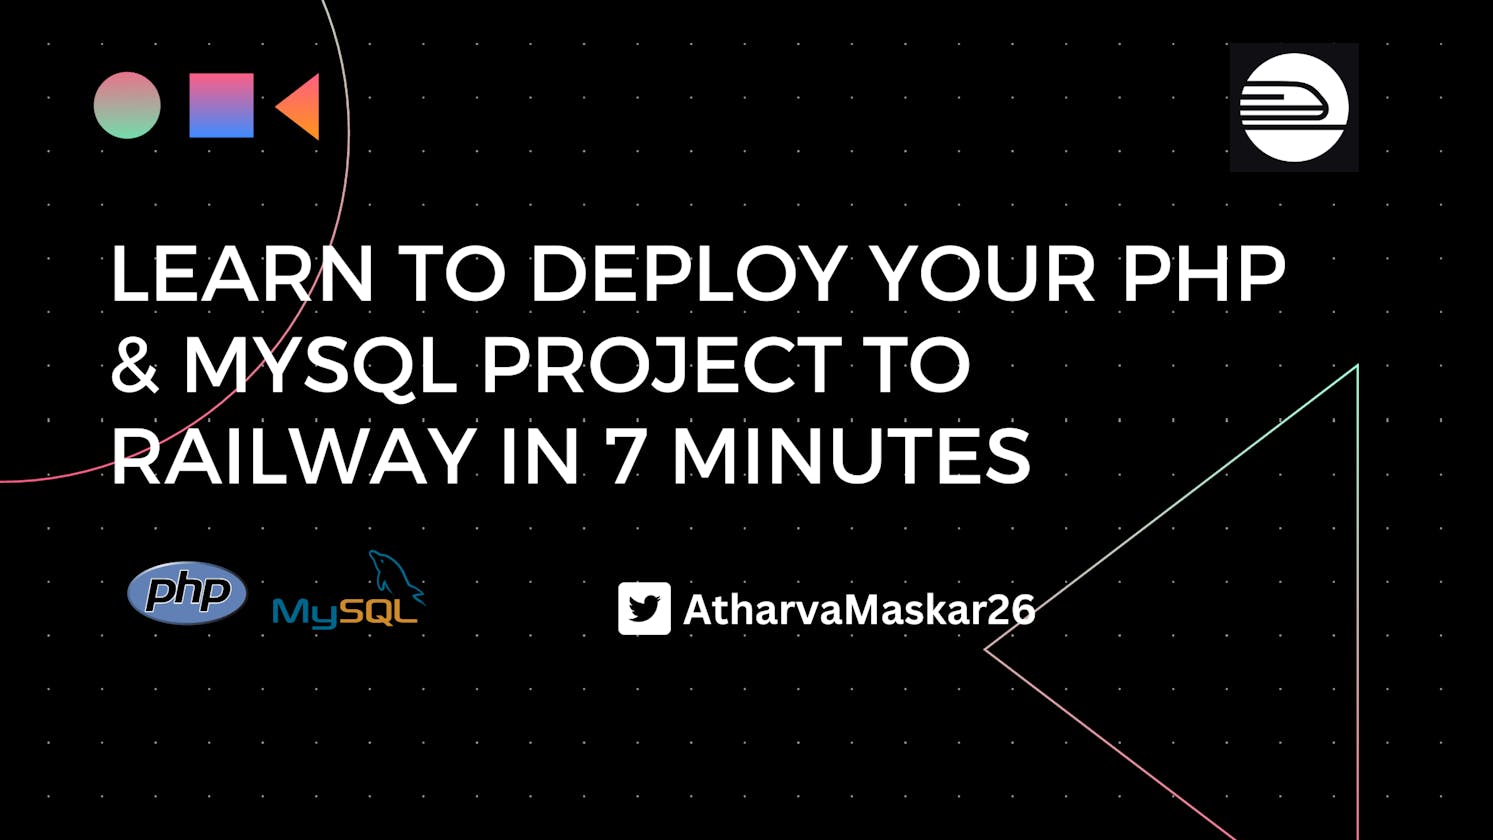 Deploy your PHP & MySQL based website in 7 minutes